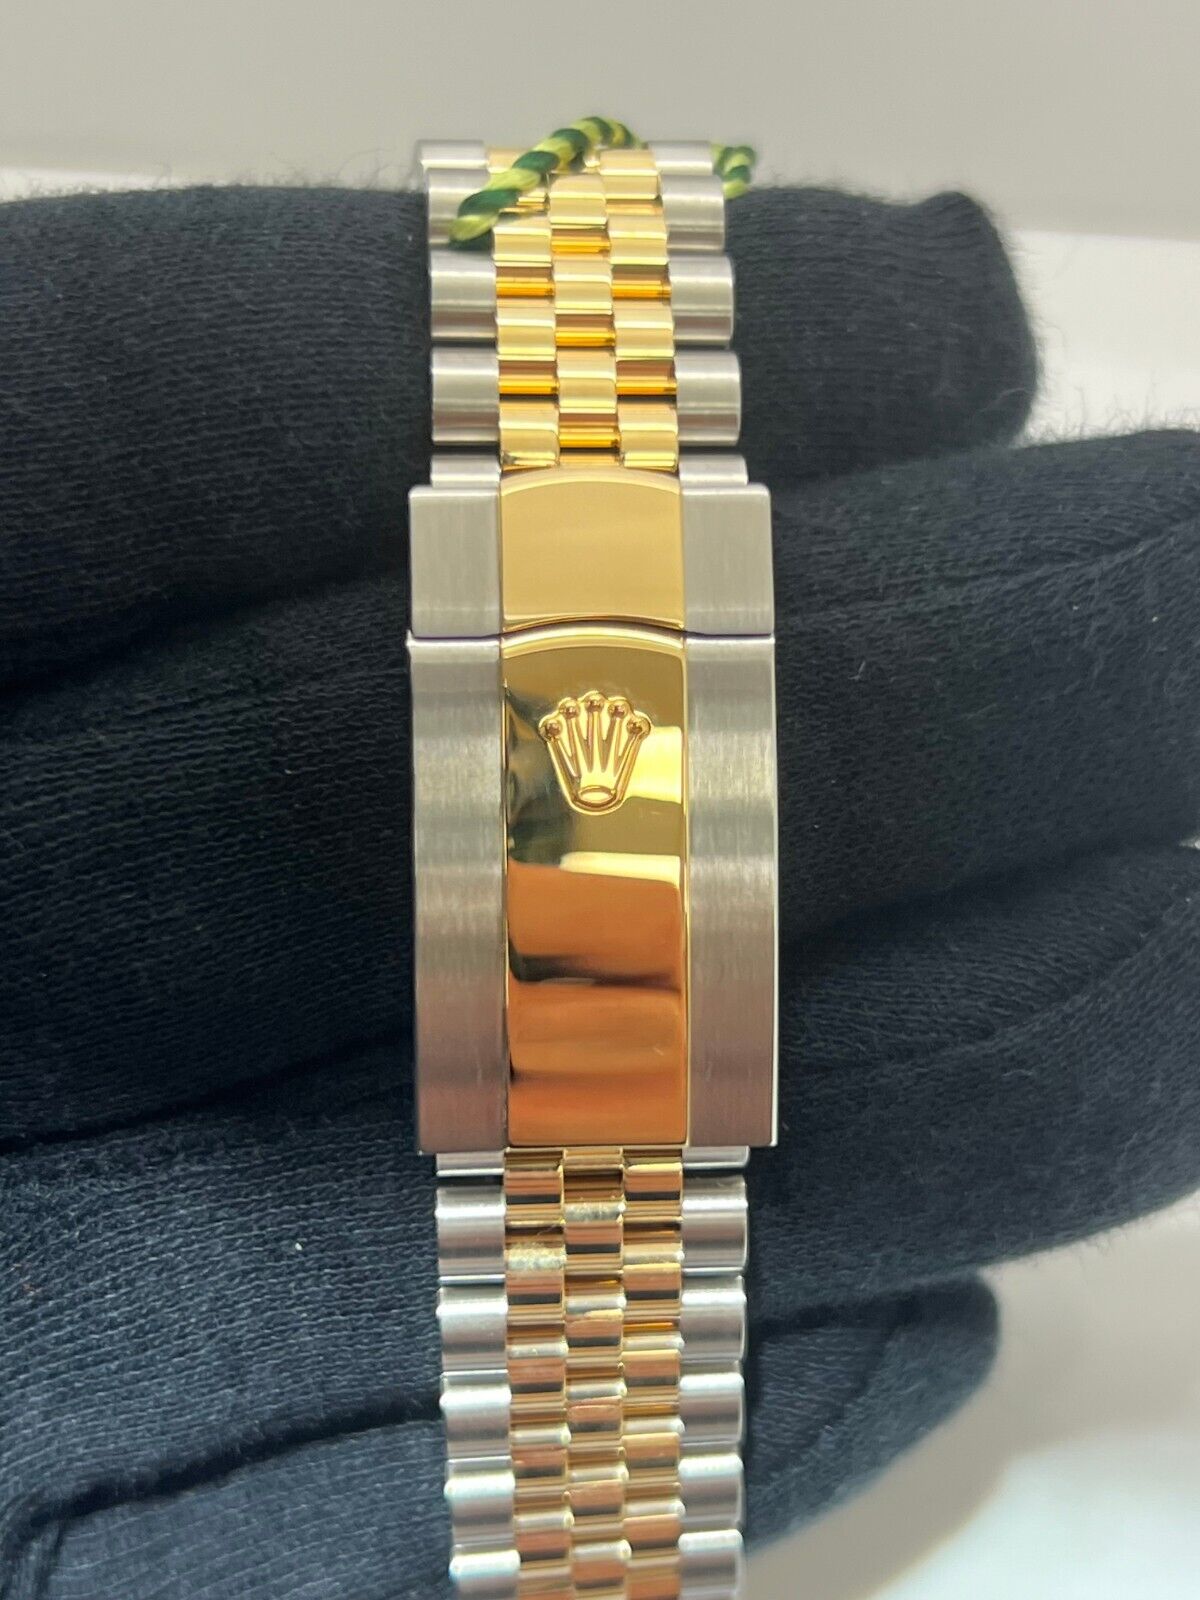 Rolex Datejust 126333 Gold and Silver Jubilee Bracelet with Gold Bezel